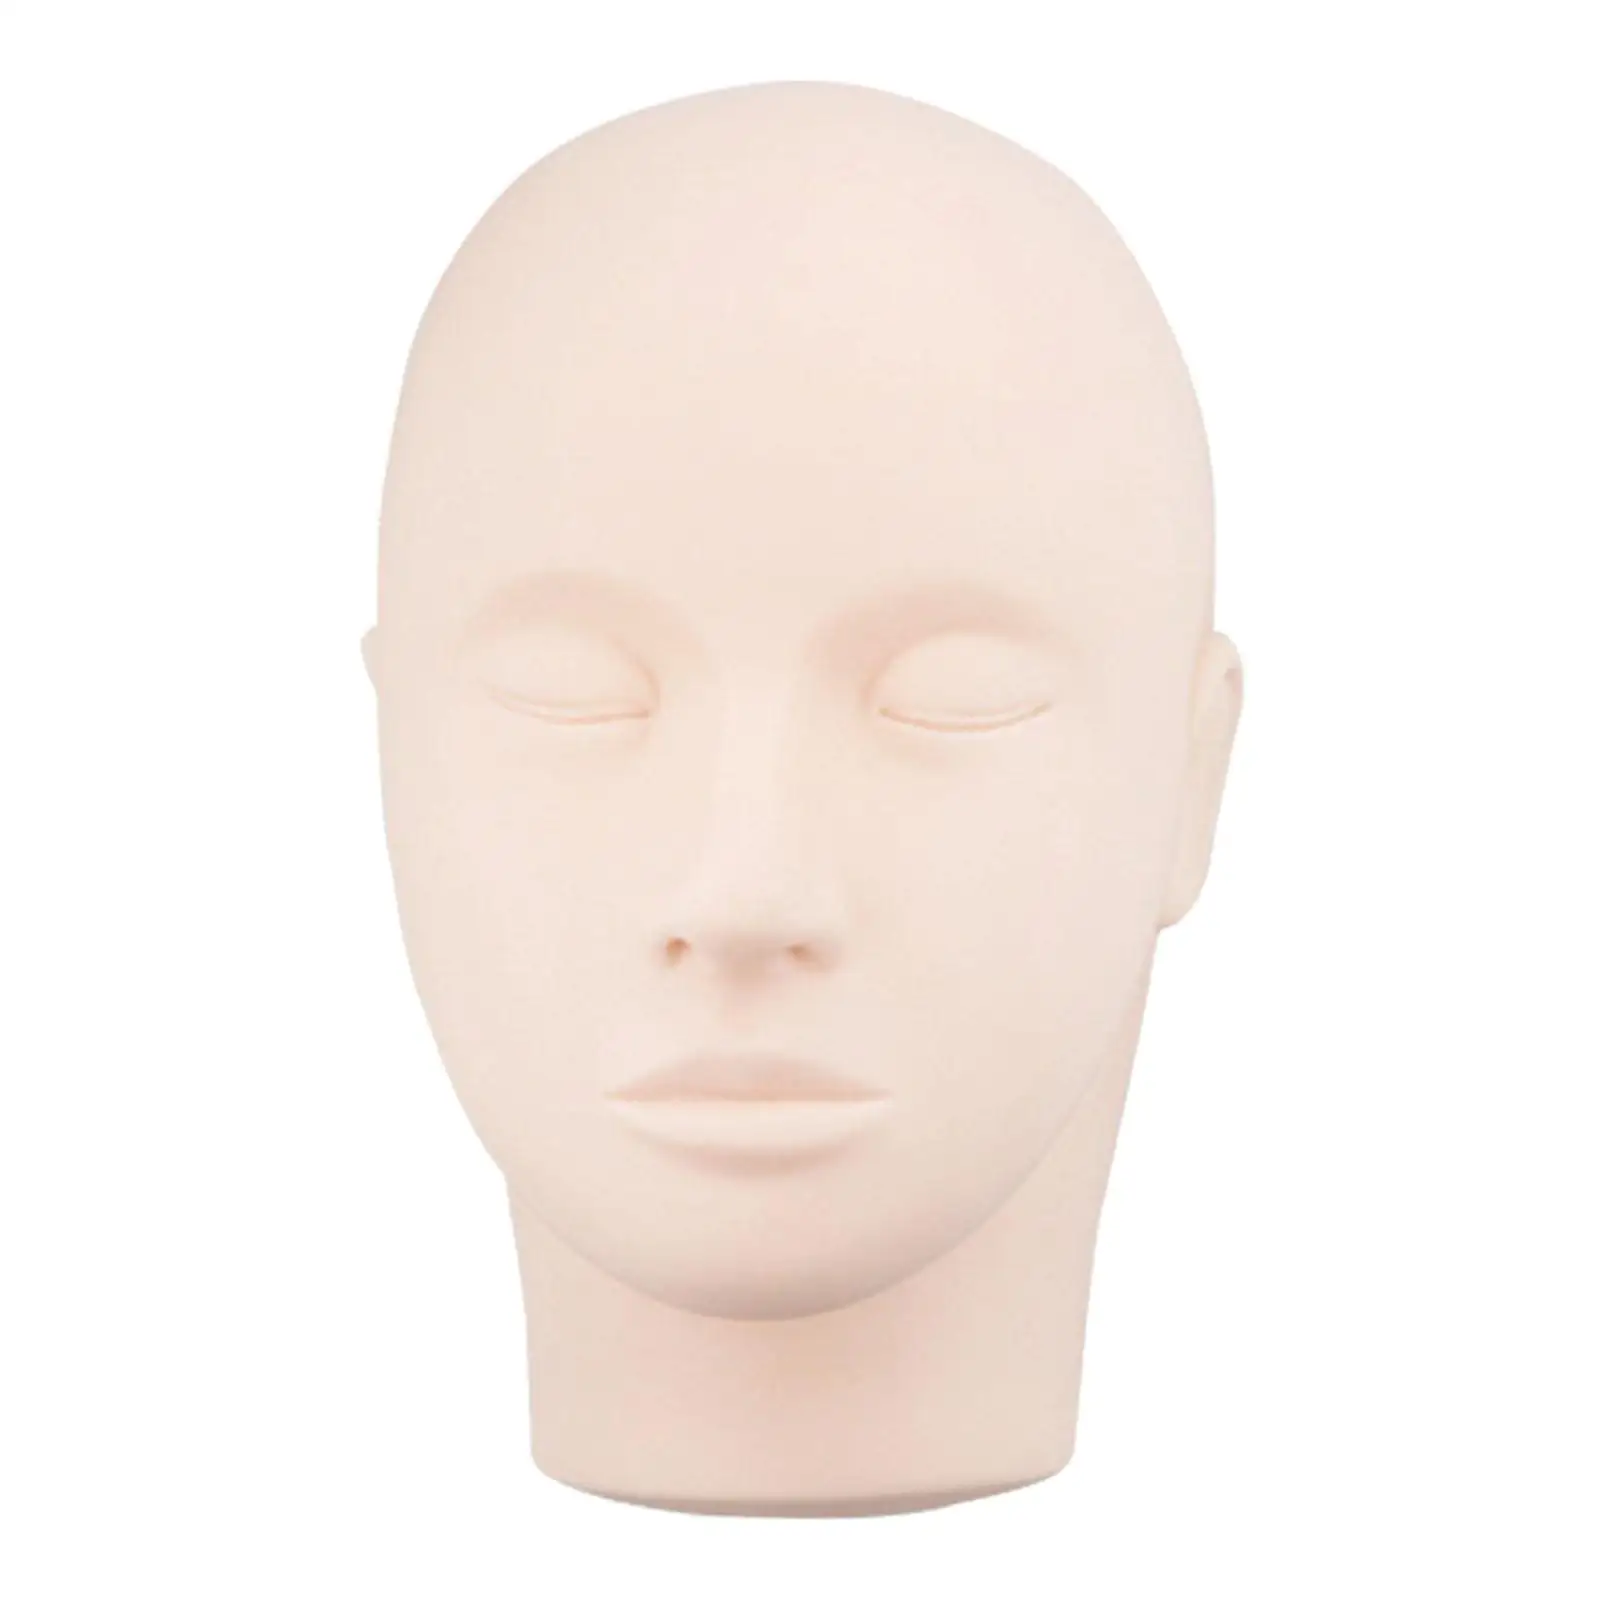 Extension Silicone Head Extension Supplies/ /Soft Touch Head for Practice/ Make up Training